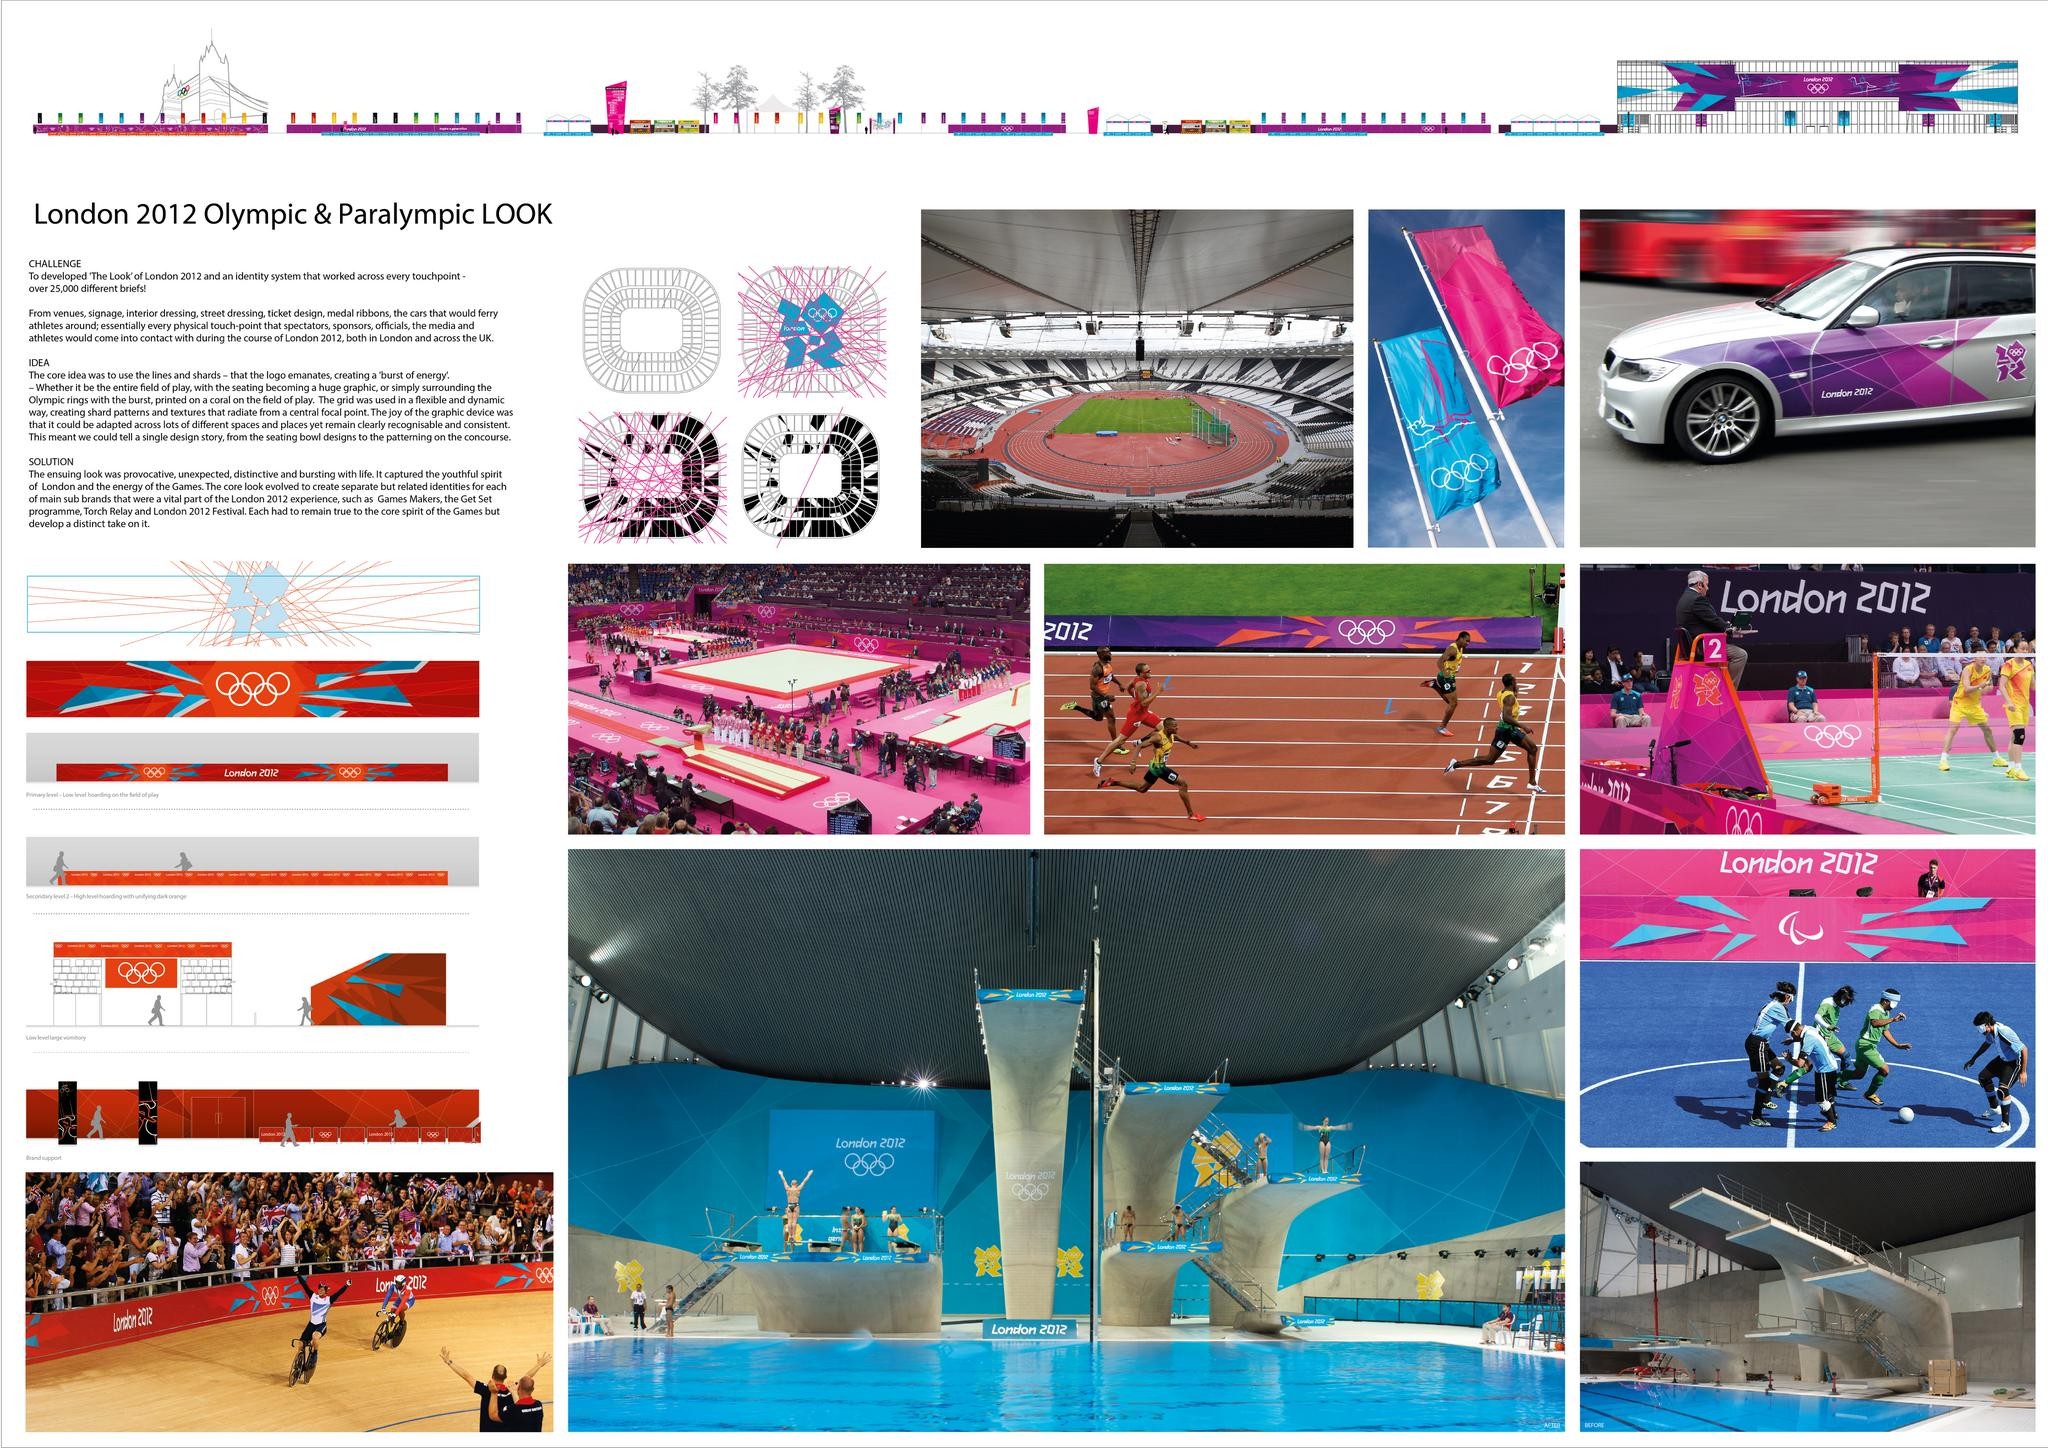 LONDON 2012 OLYMPIC & PARALYMPIC LOOK